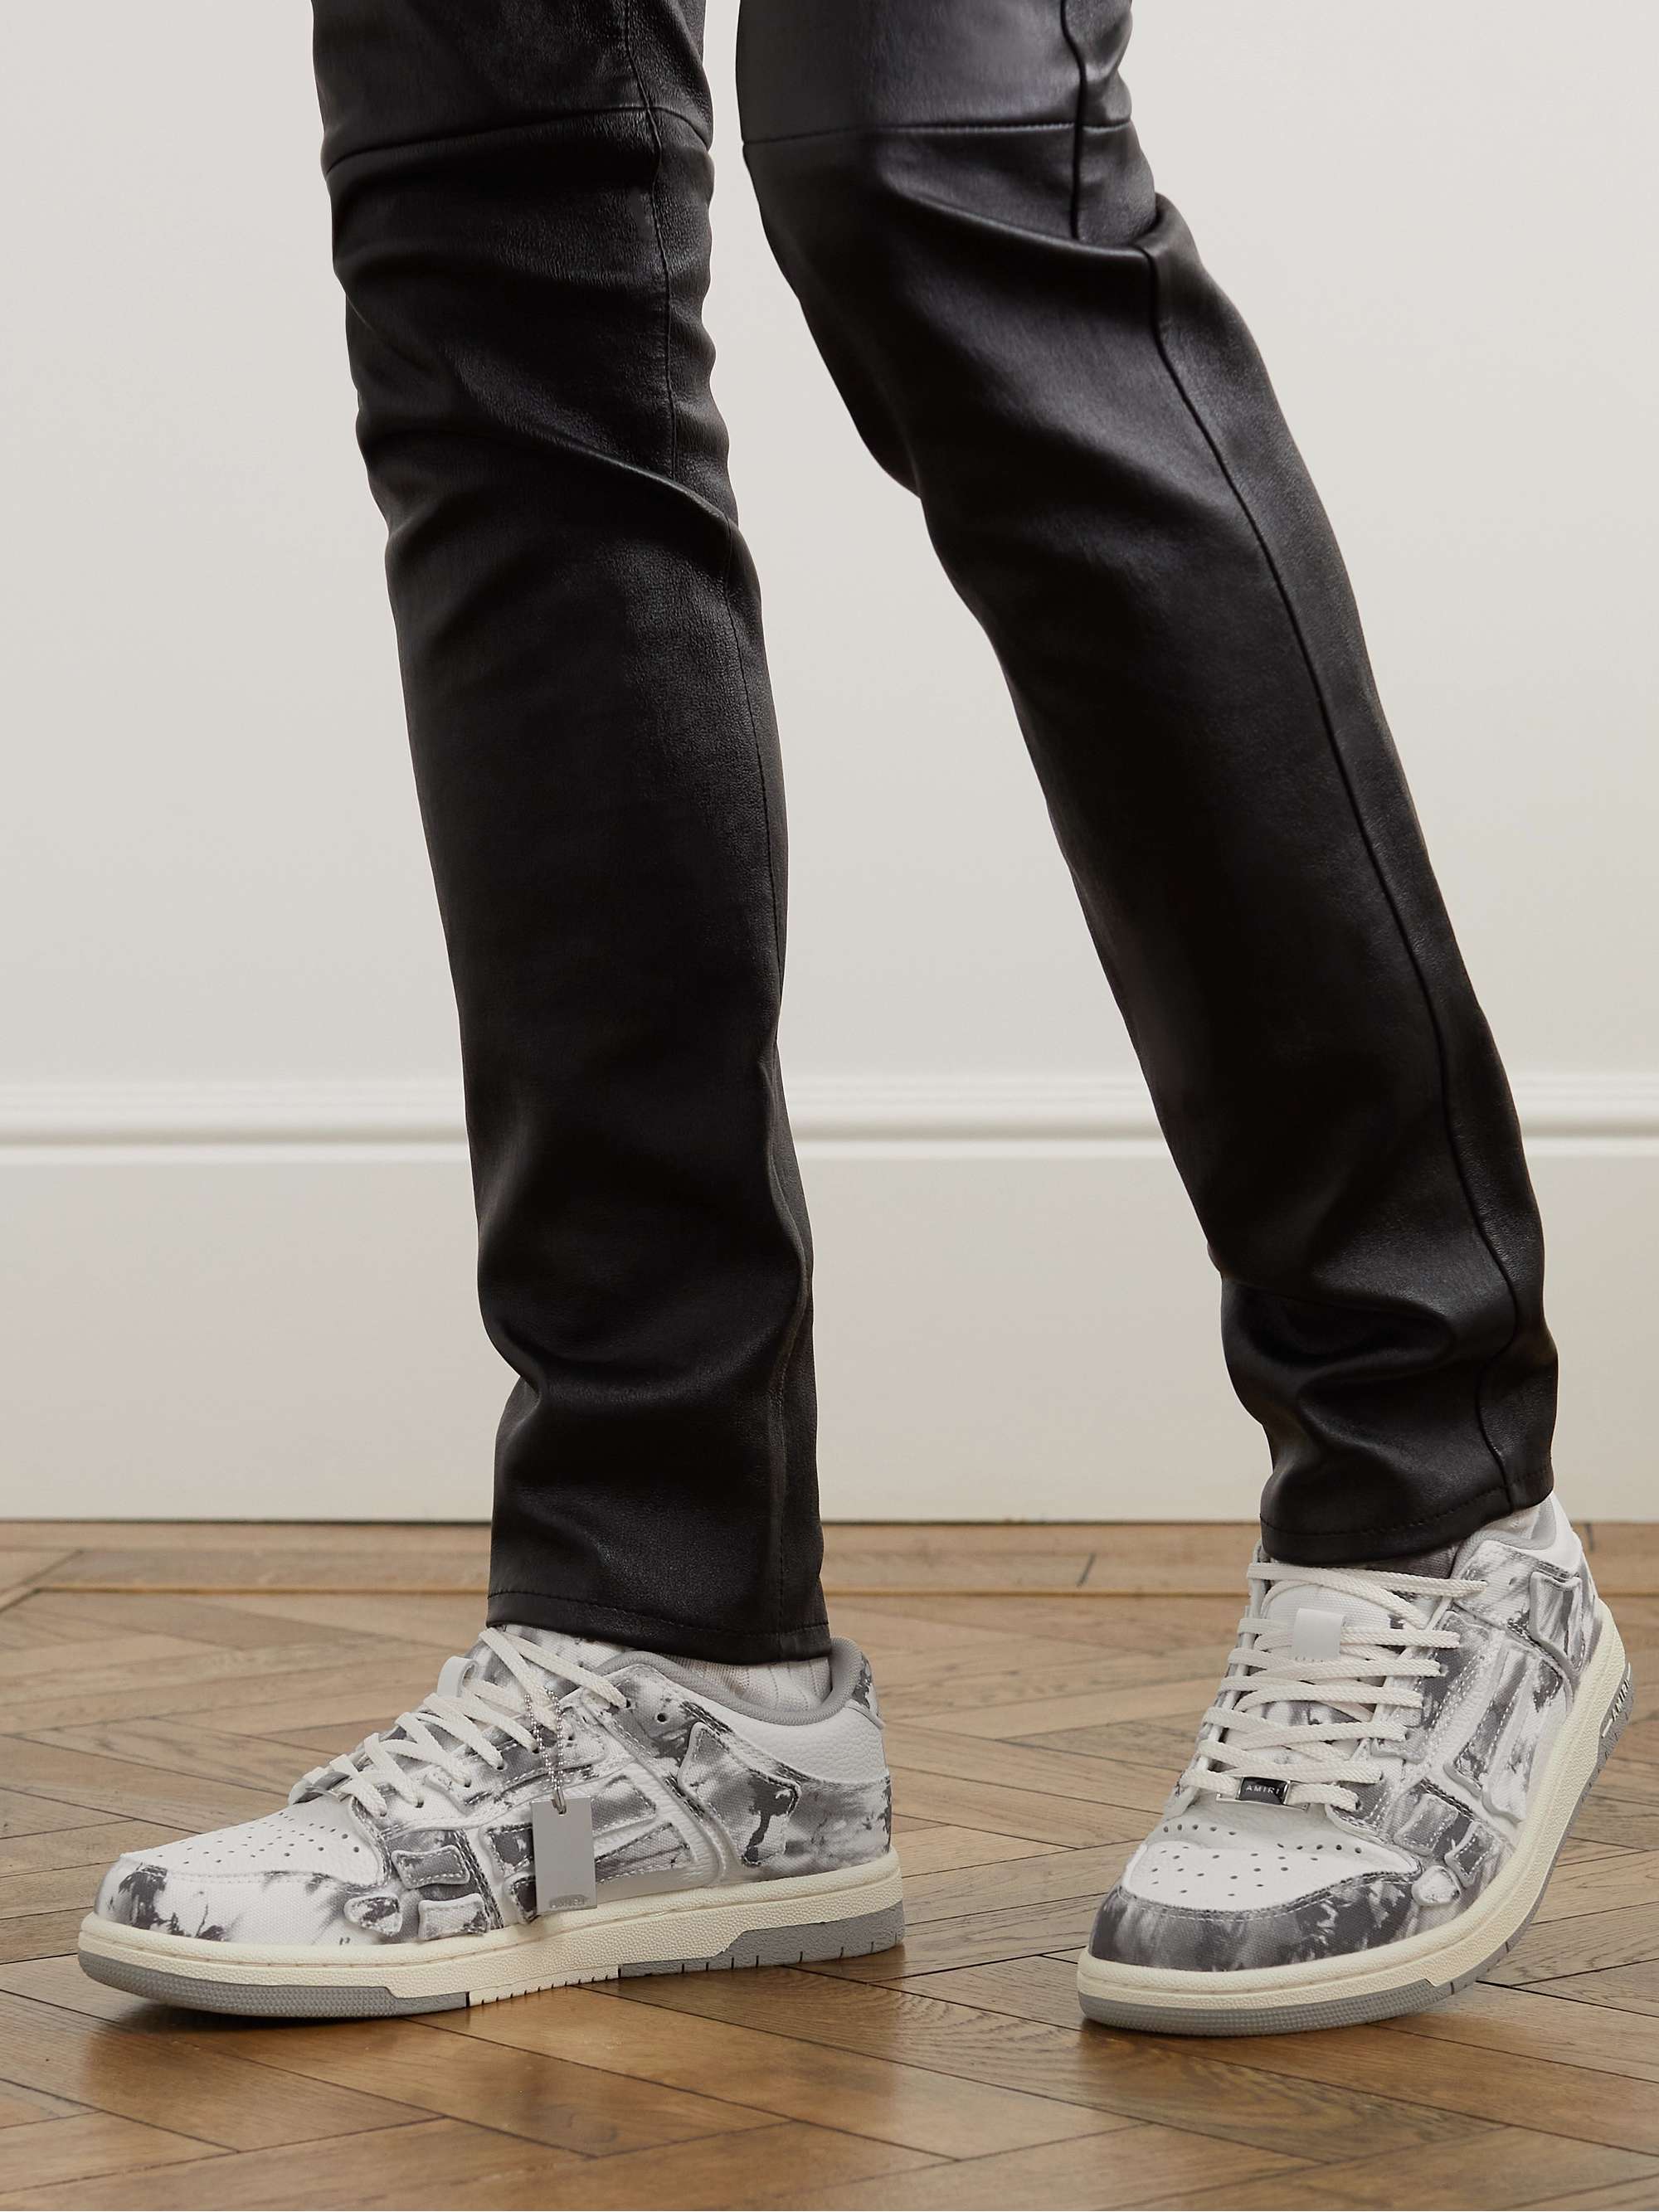 AMIRI Skeleton Leather-Trimmed Tie-Dyed Canvas Sneakers | MR PORTER